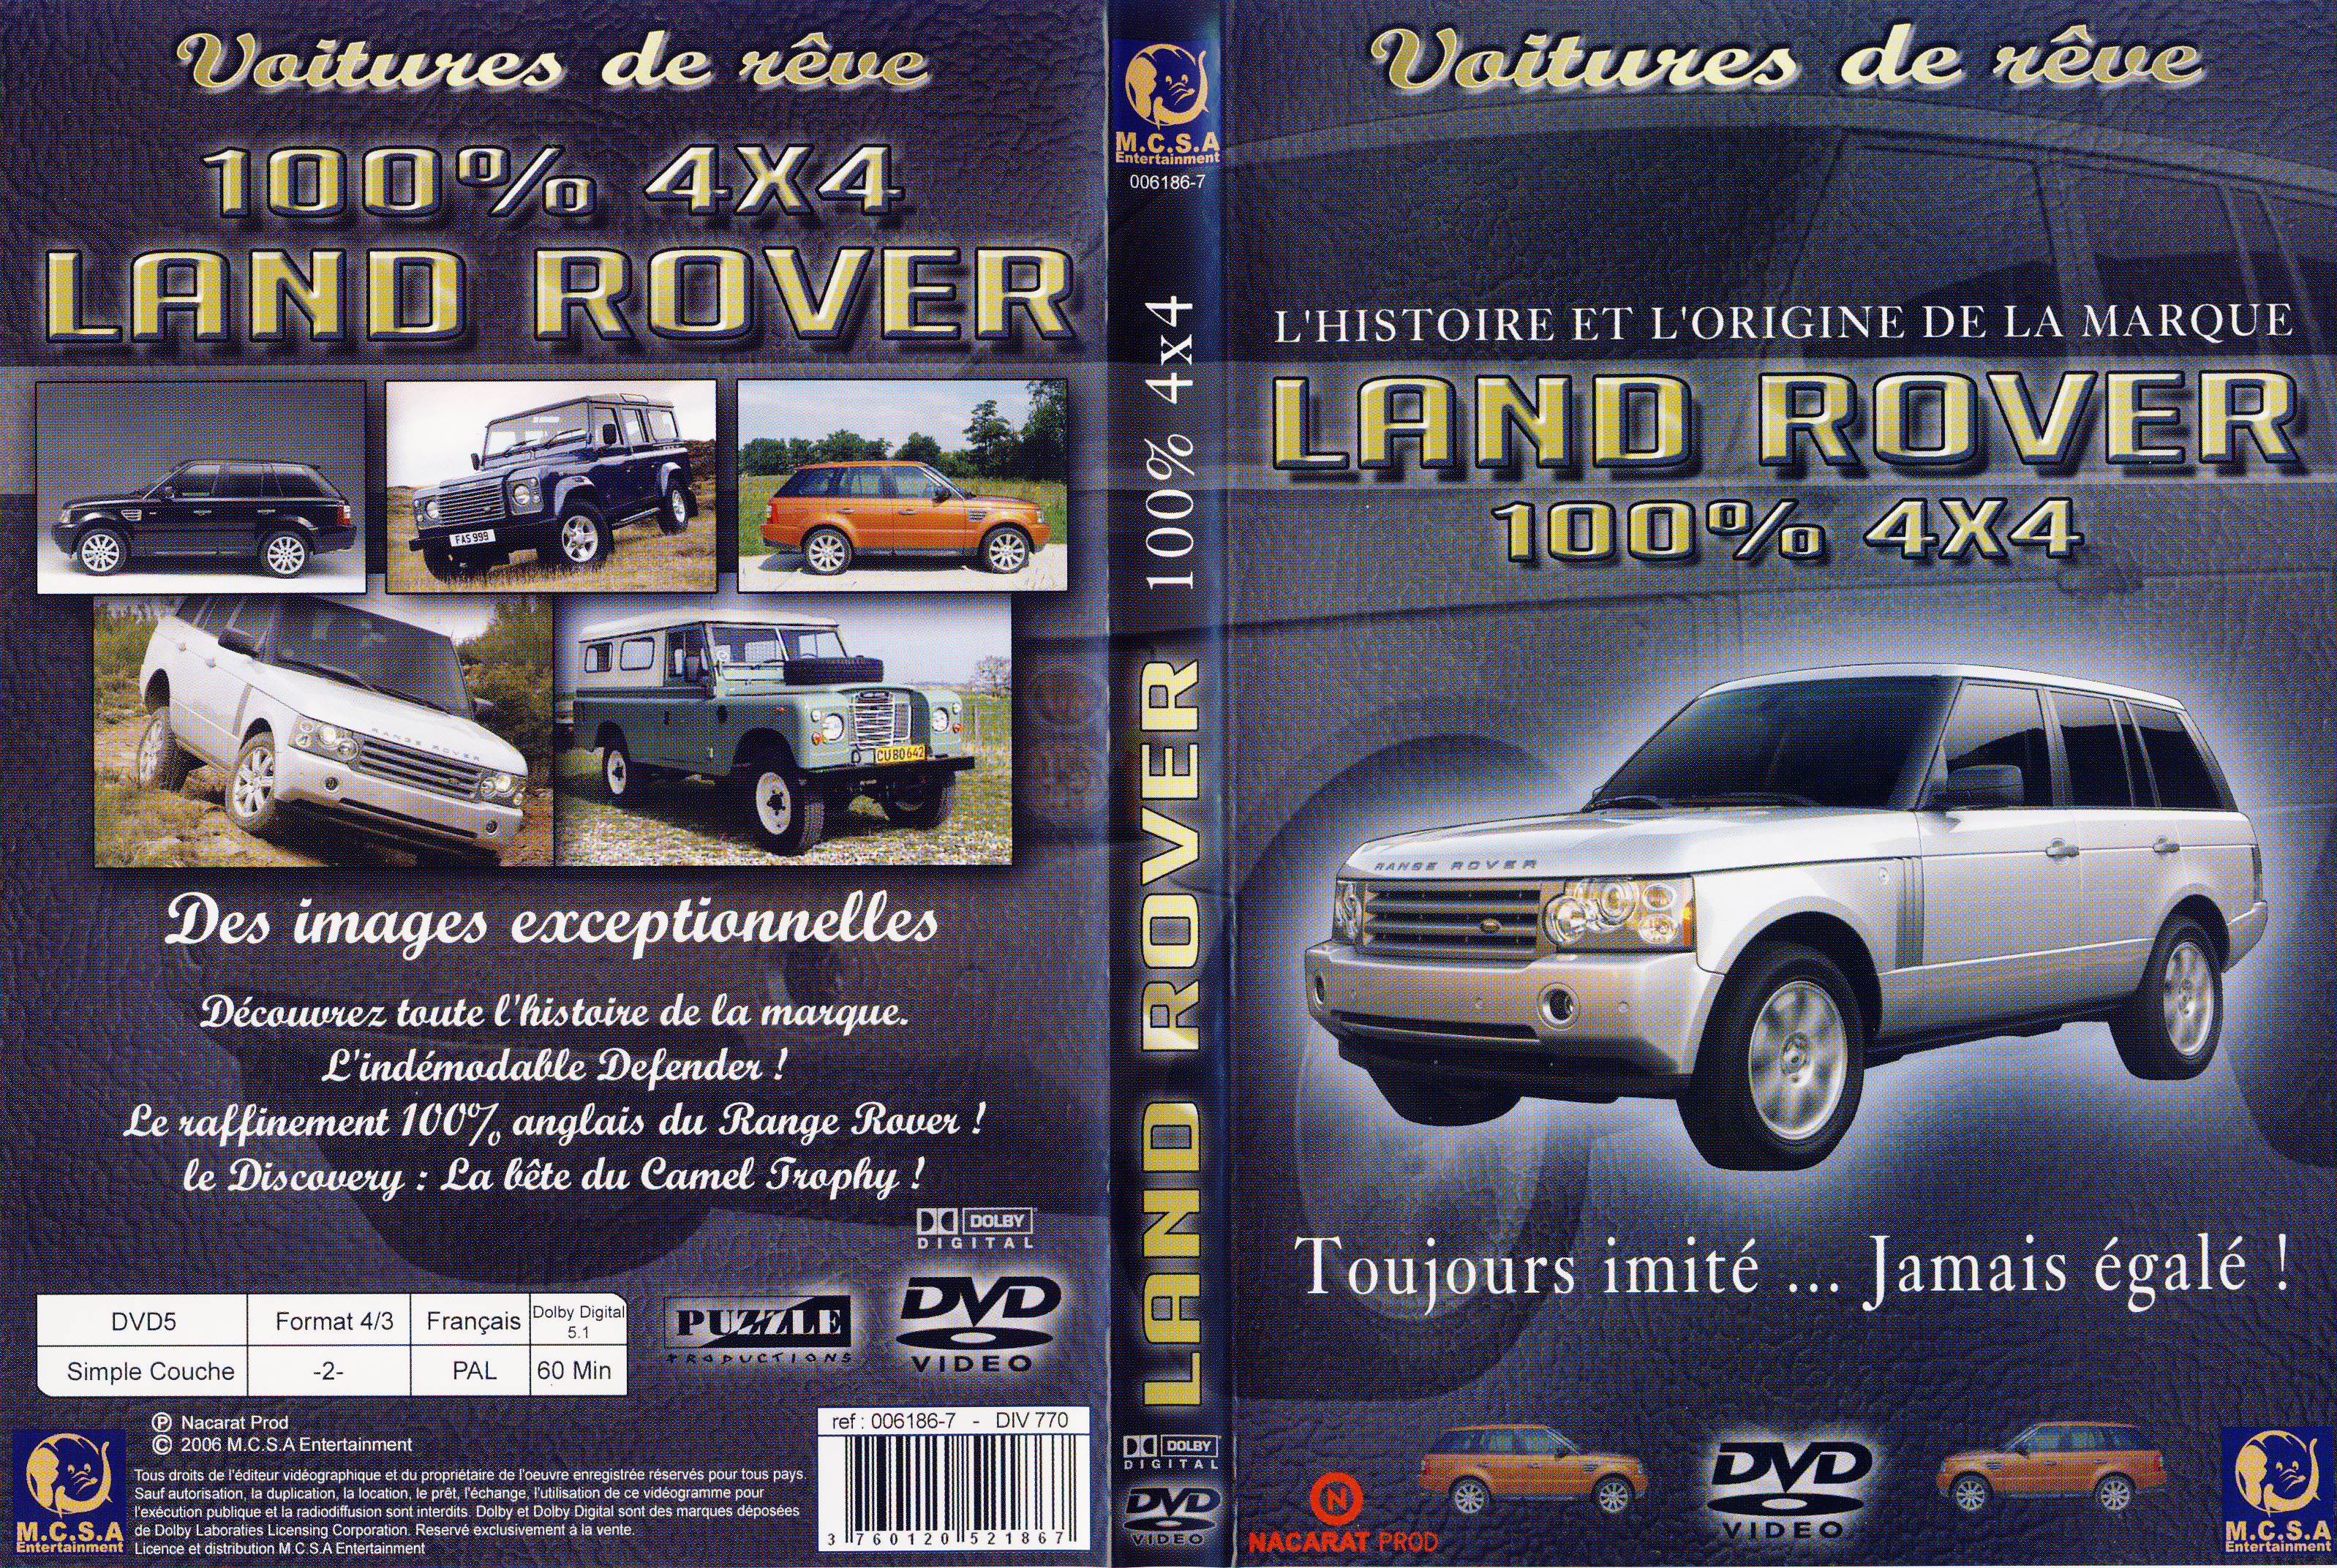 Jaquette DVD Land Rover 100 4x4